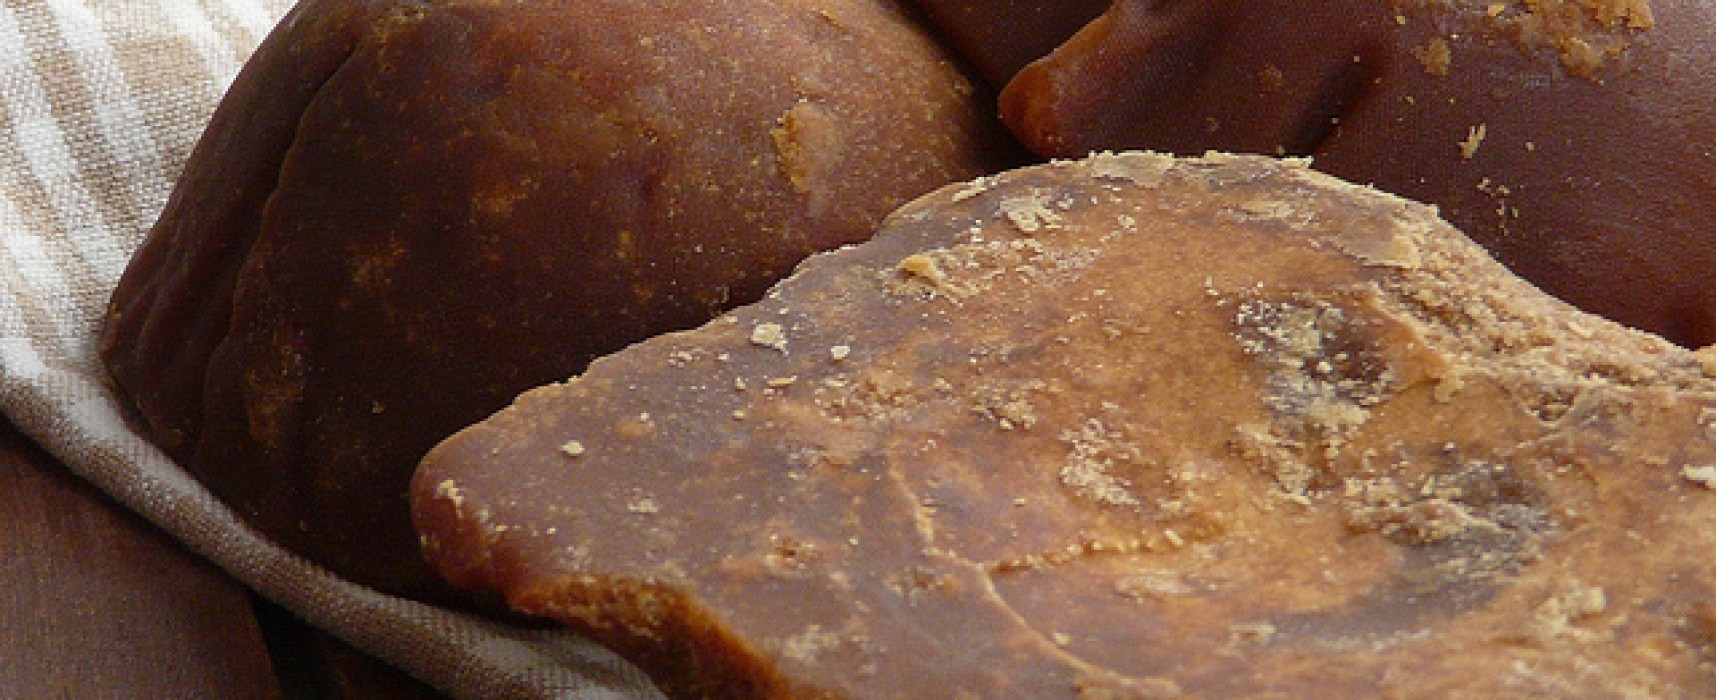 The Wonder Ingredient that is Jaggery!